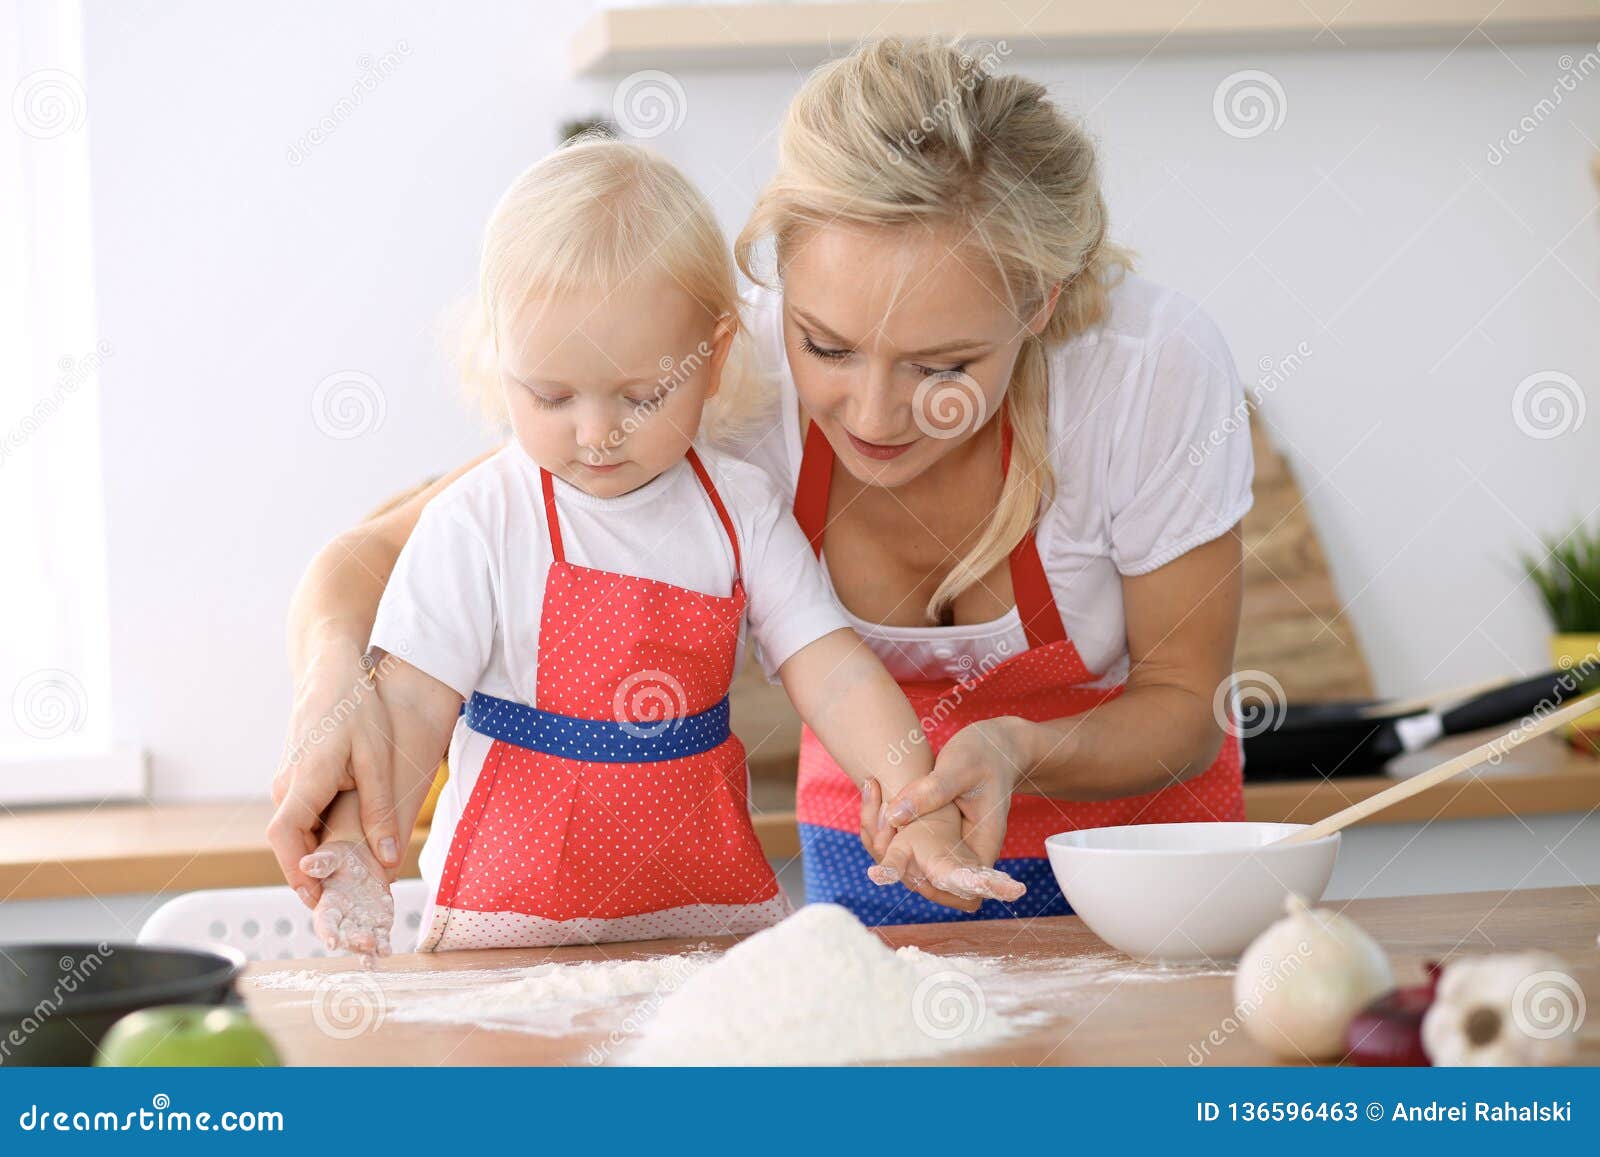 Little Girl And Her Blonde Mom In Red Aprons Playing And Laughing